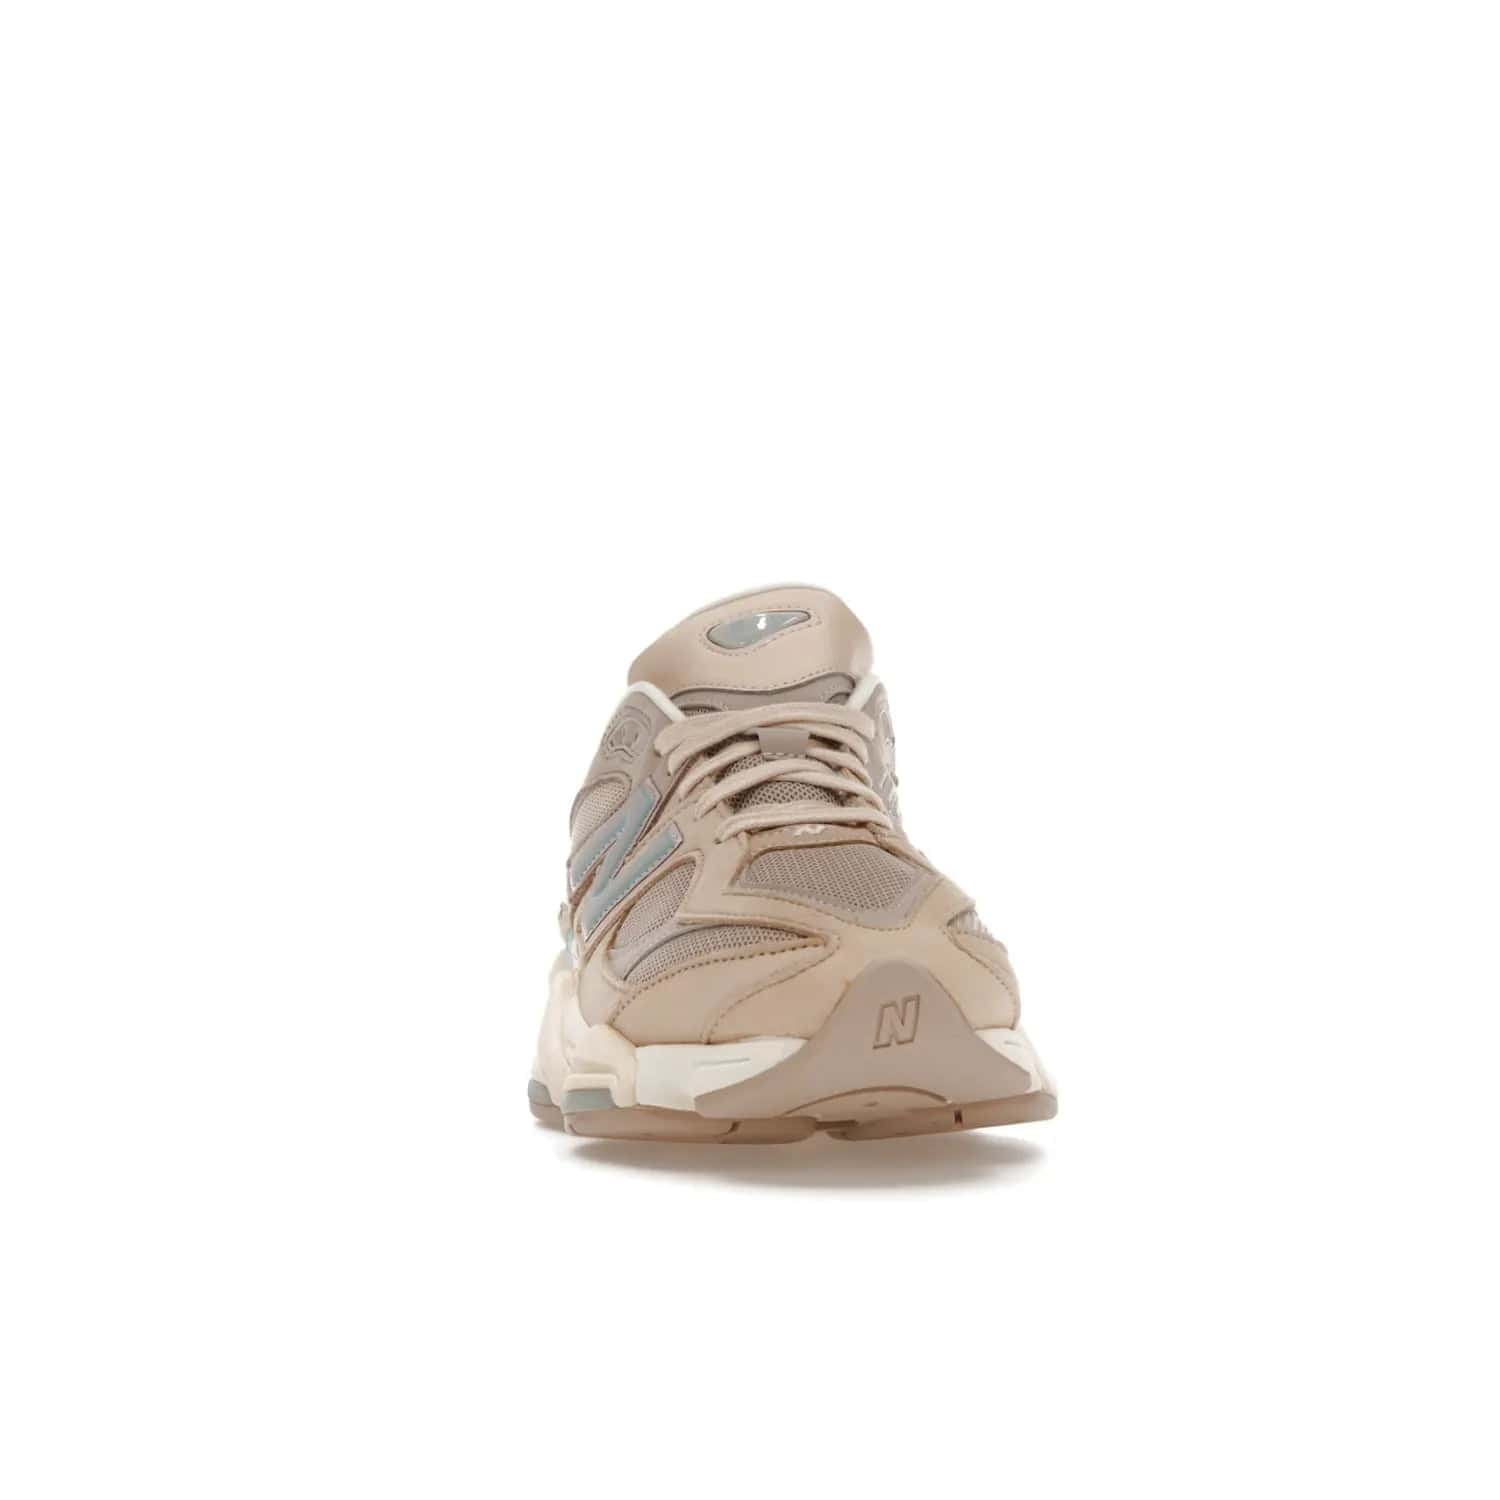 New Balance 9060 Ivory Cream Pink Sand - Image 9 - Only at www.BallersClubKickz.com - New Balance 9060 Ivory Cream Pink Sand - Sleek meshed upper, premium suede overlays, ABZORB cushioning. Get this unique sneaker ahead of the trend, launching December 6th, 2022!